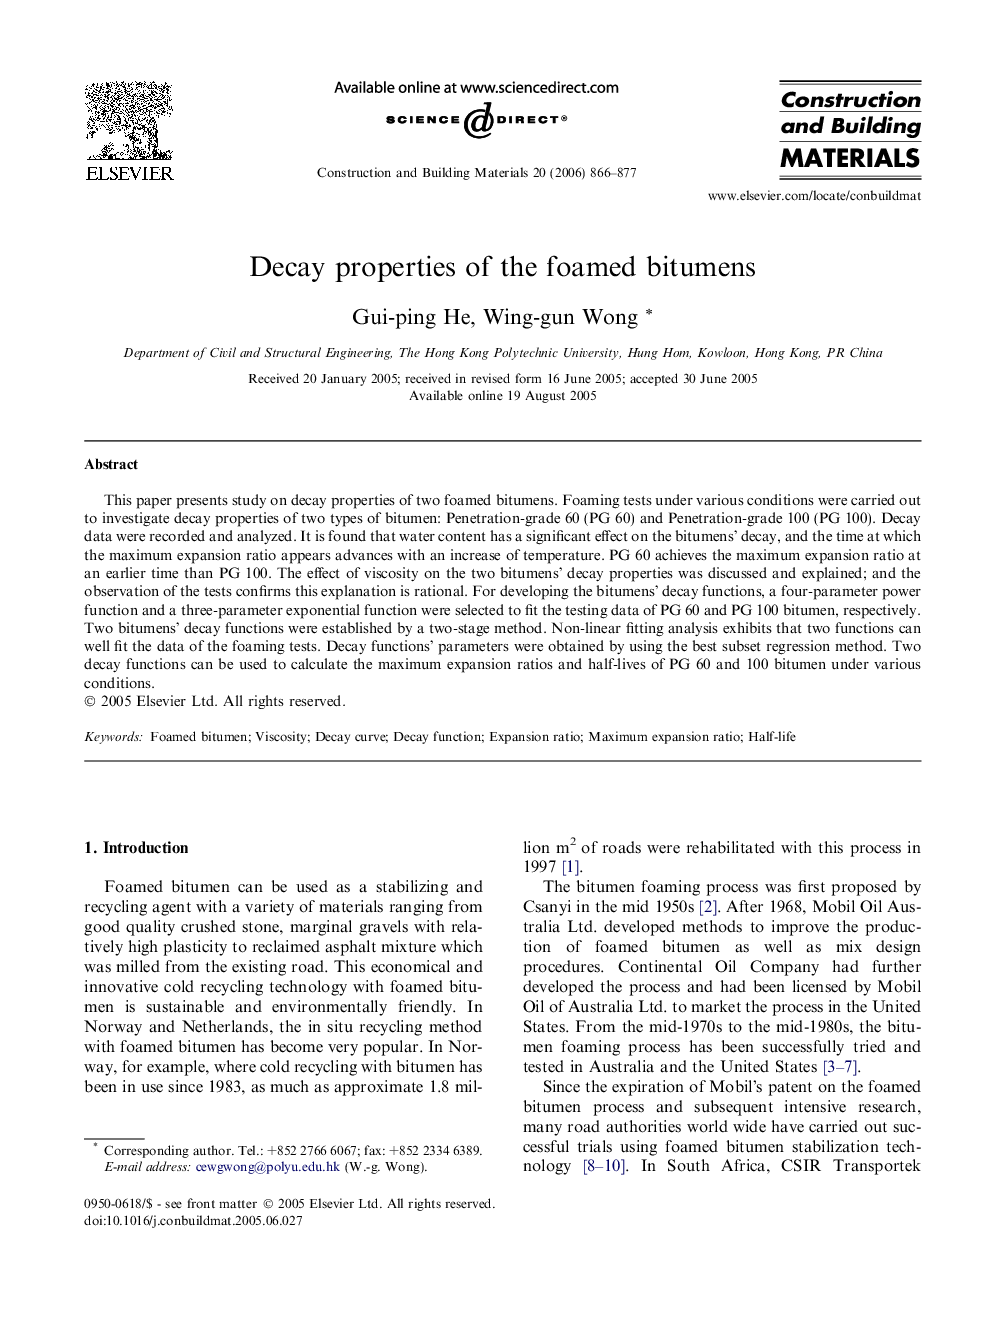 Decay properties of the foamed bitumens